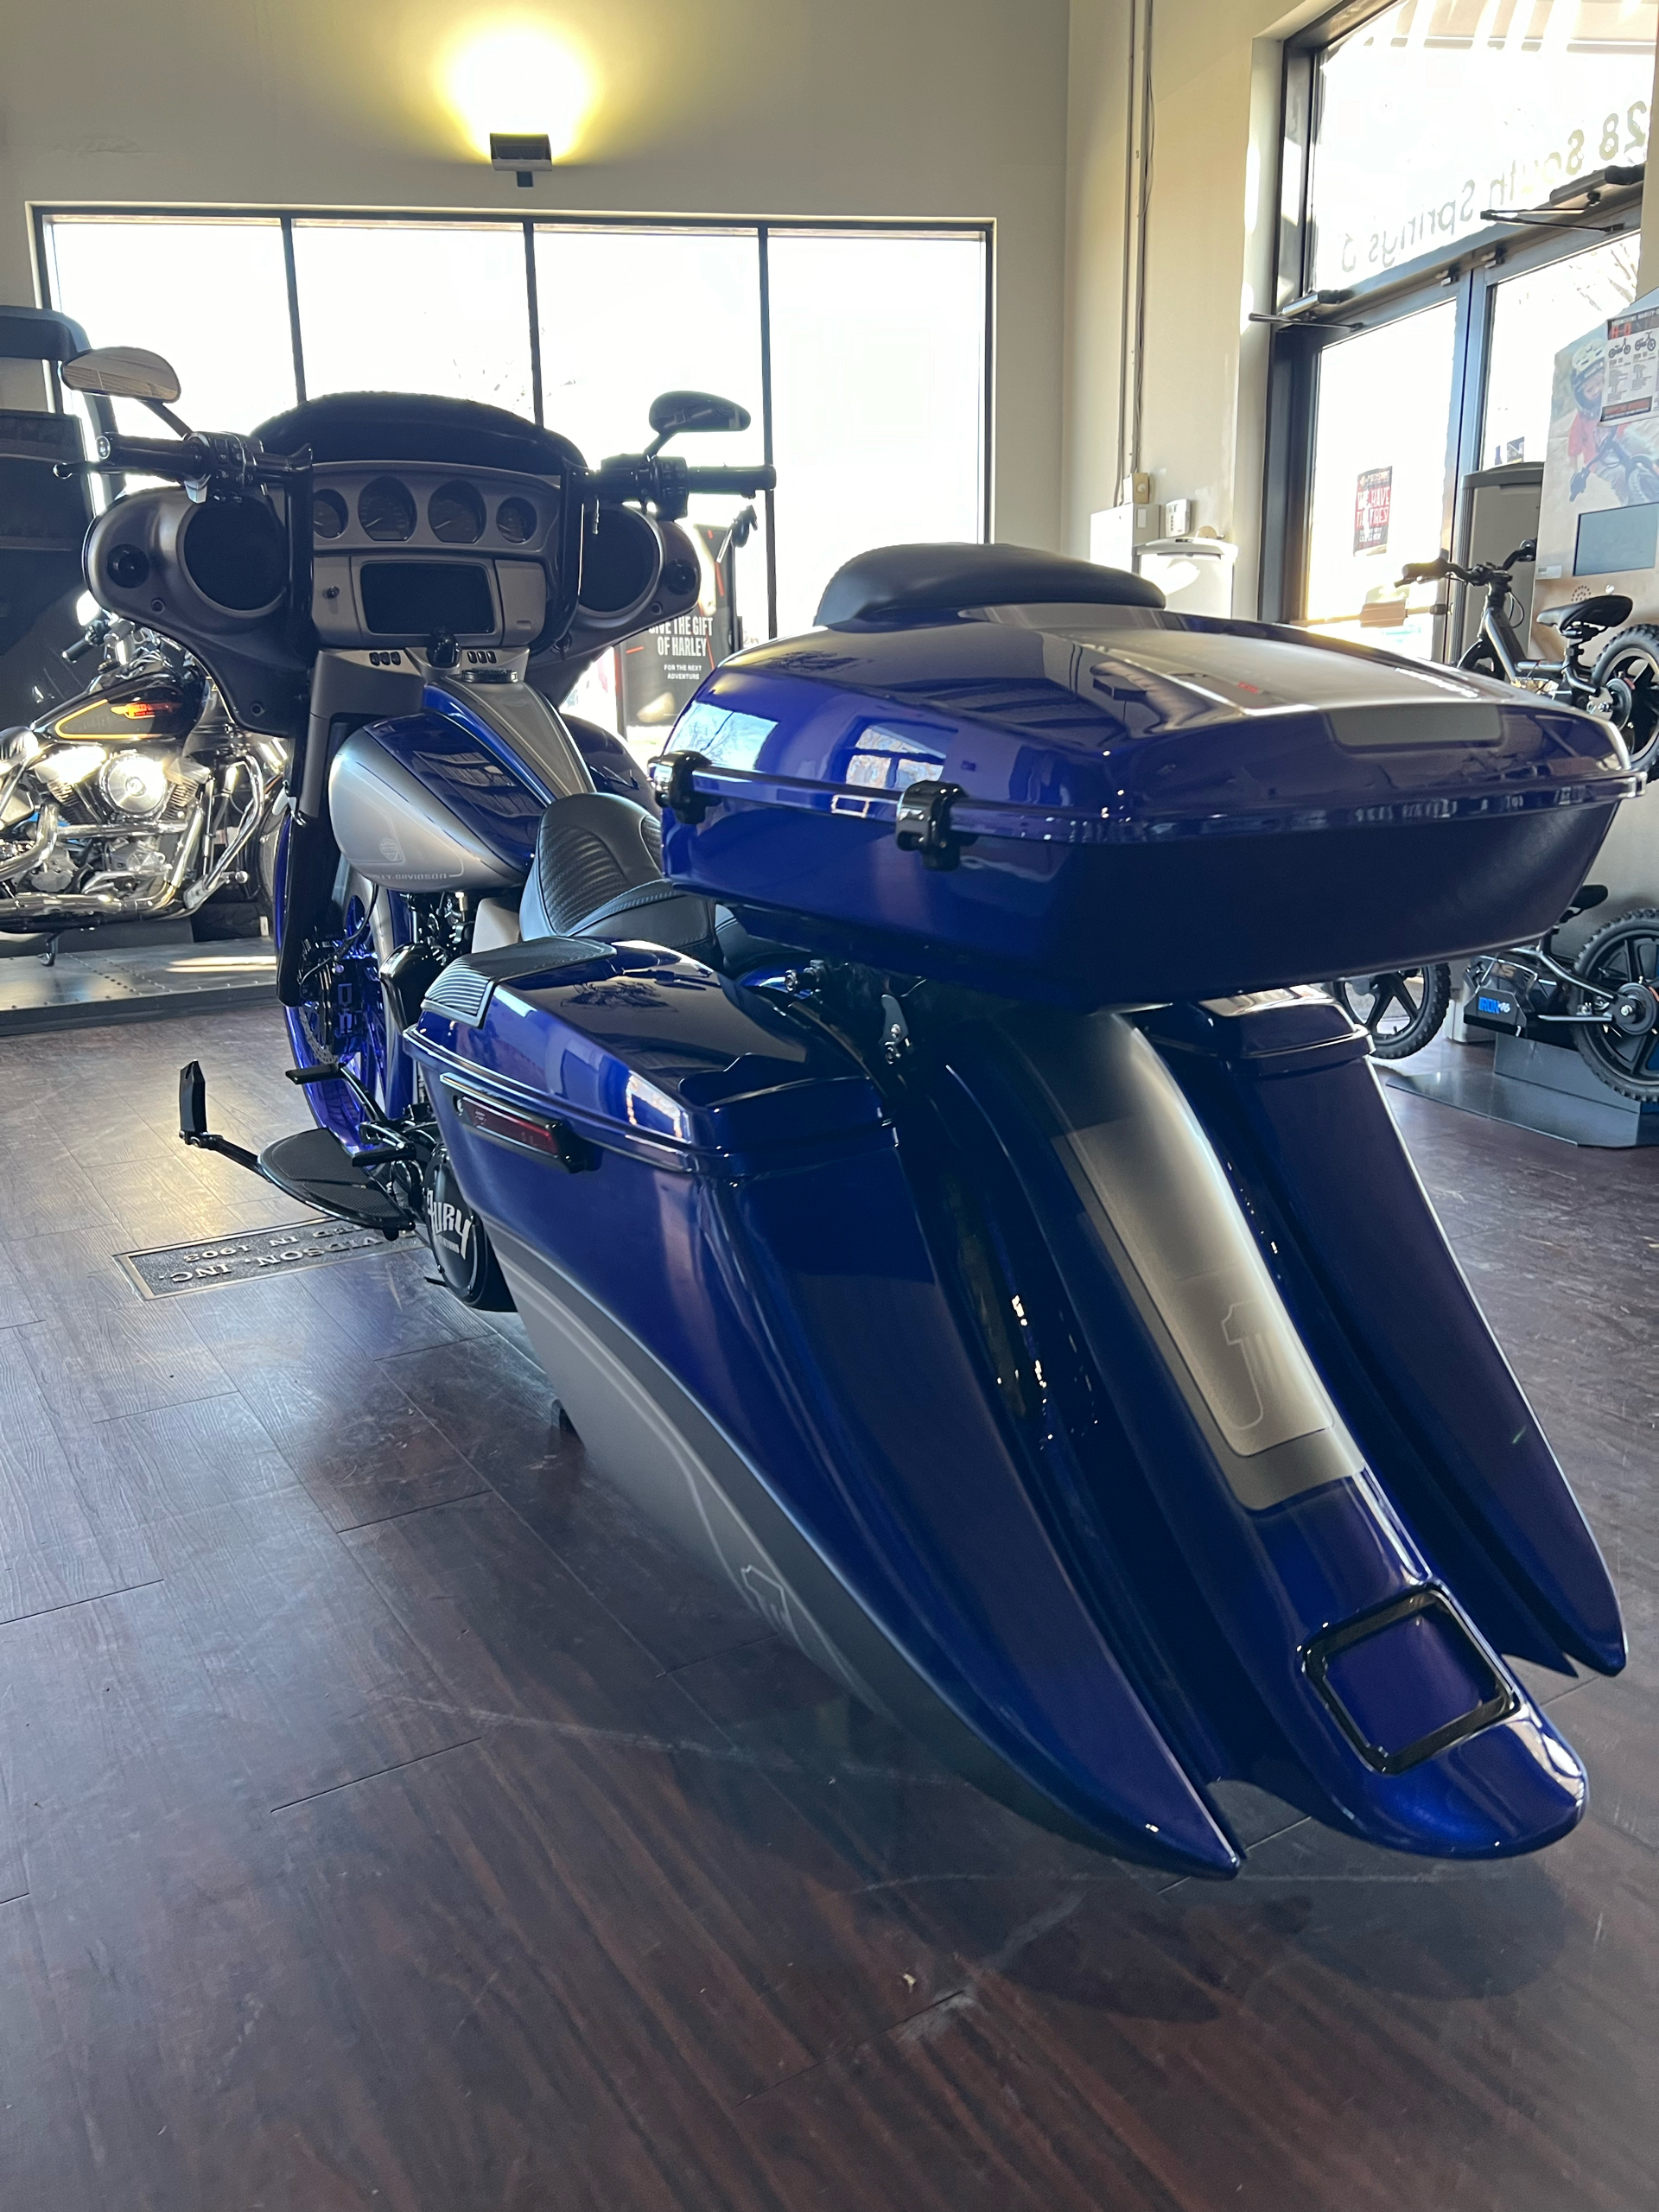 2020 Harley-Davidson Street Glide® Special in Franklin, Tennessee - Photo 17